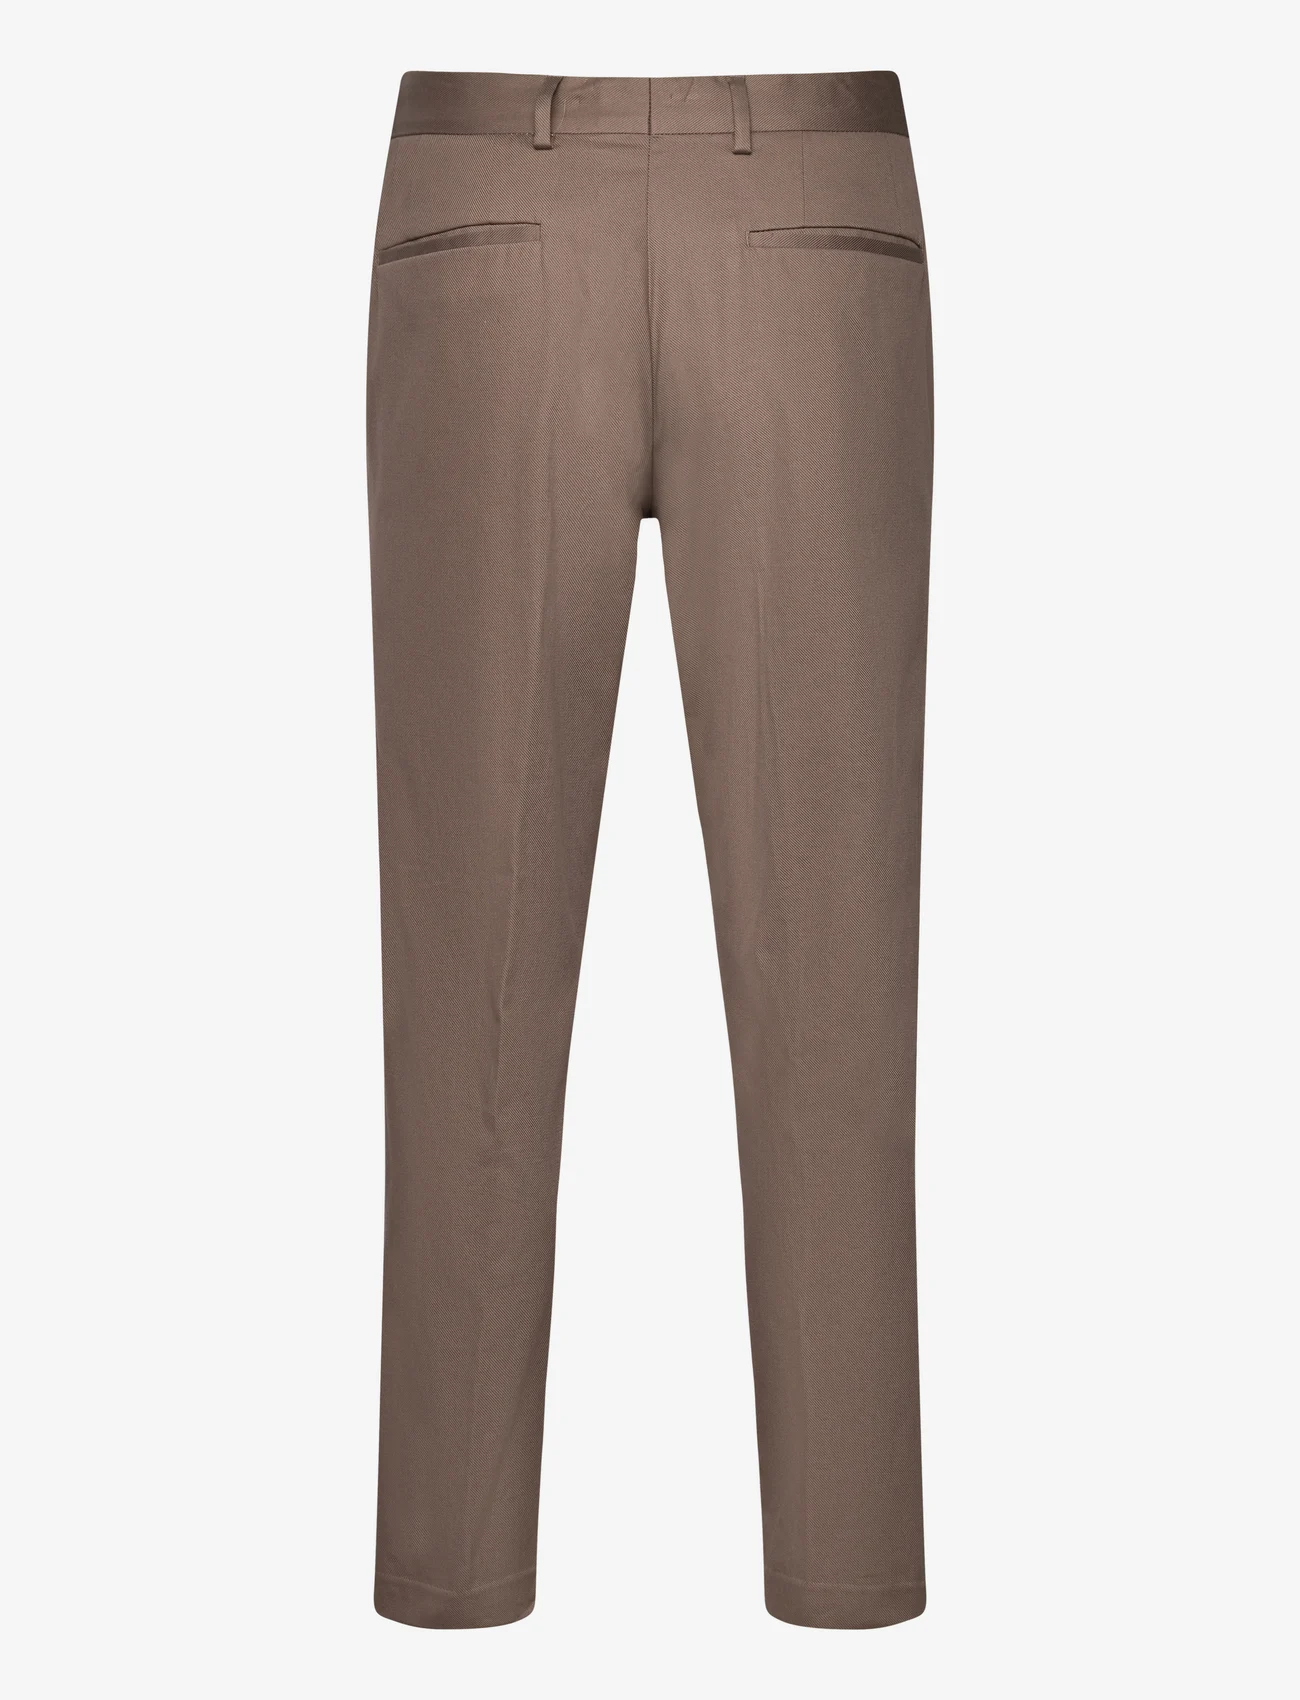 Selected Homme - SLH196-STRAIGHT GIBSON CHINO NOOS - formal trousers - morel - 1